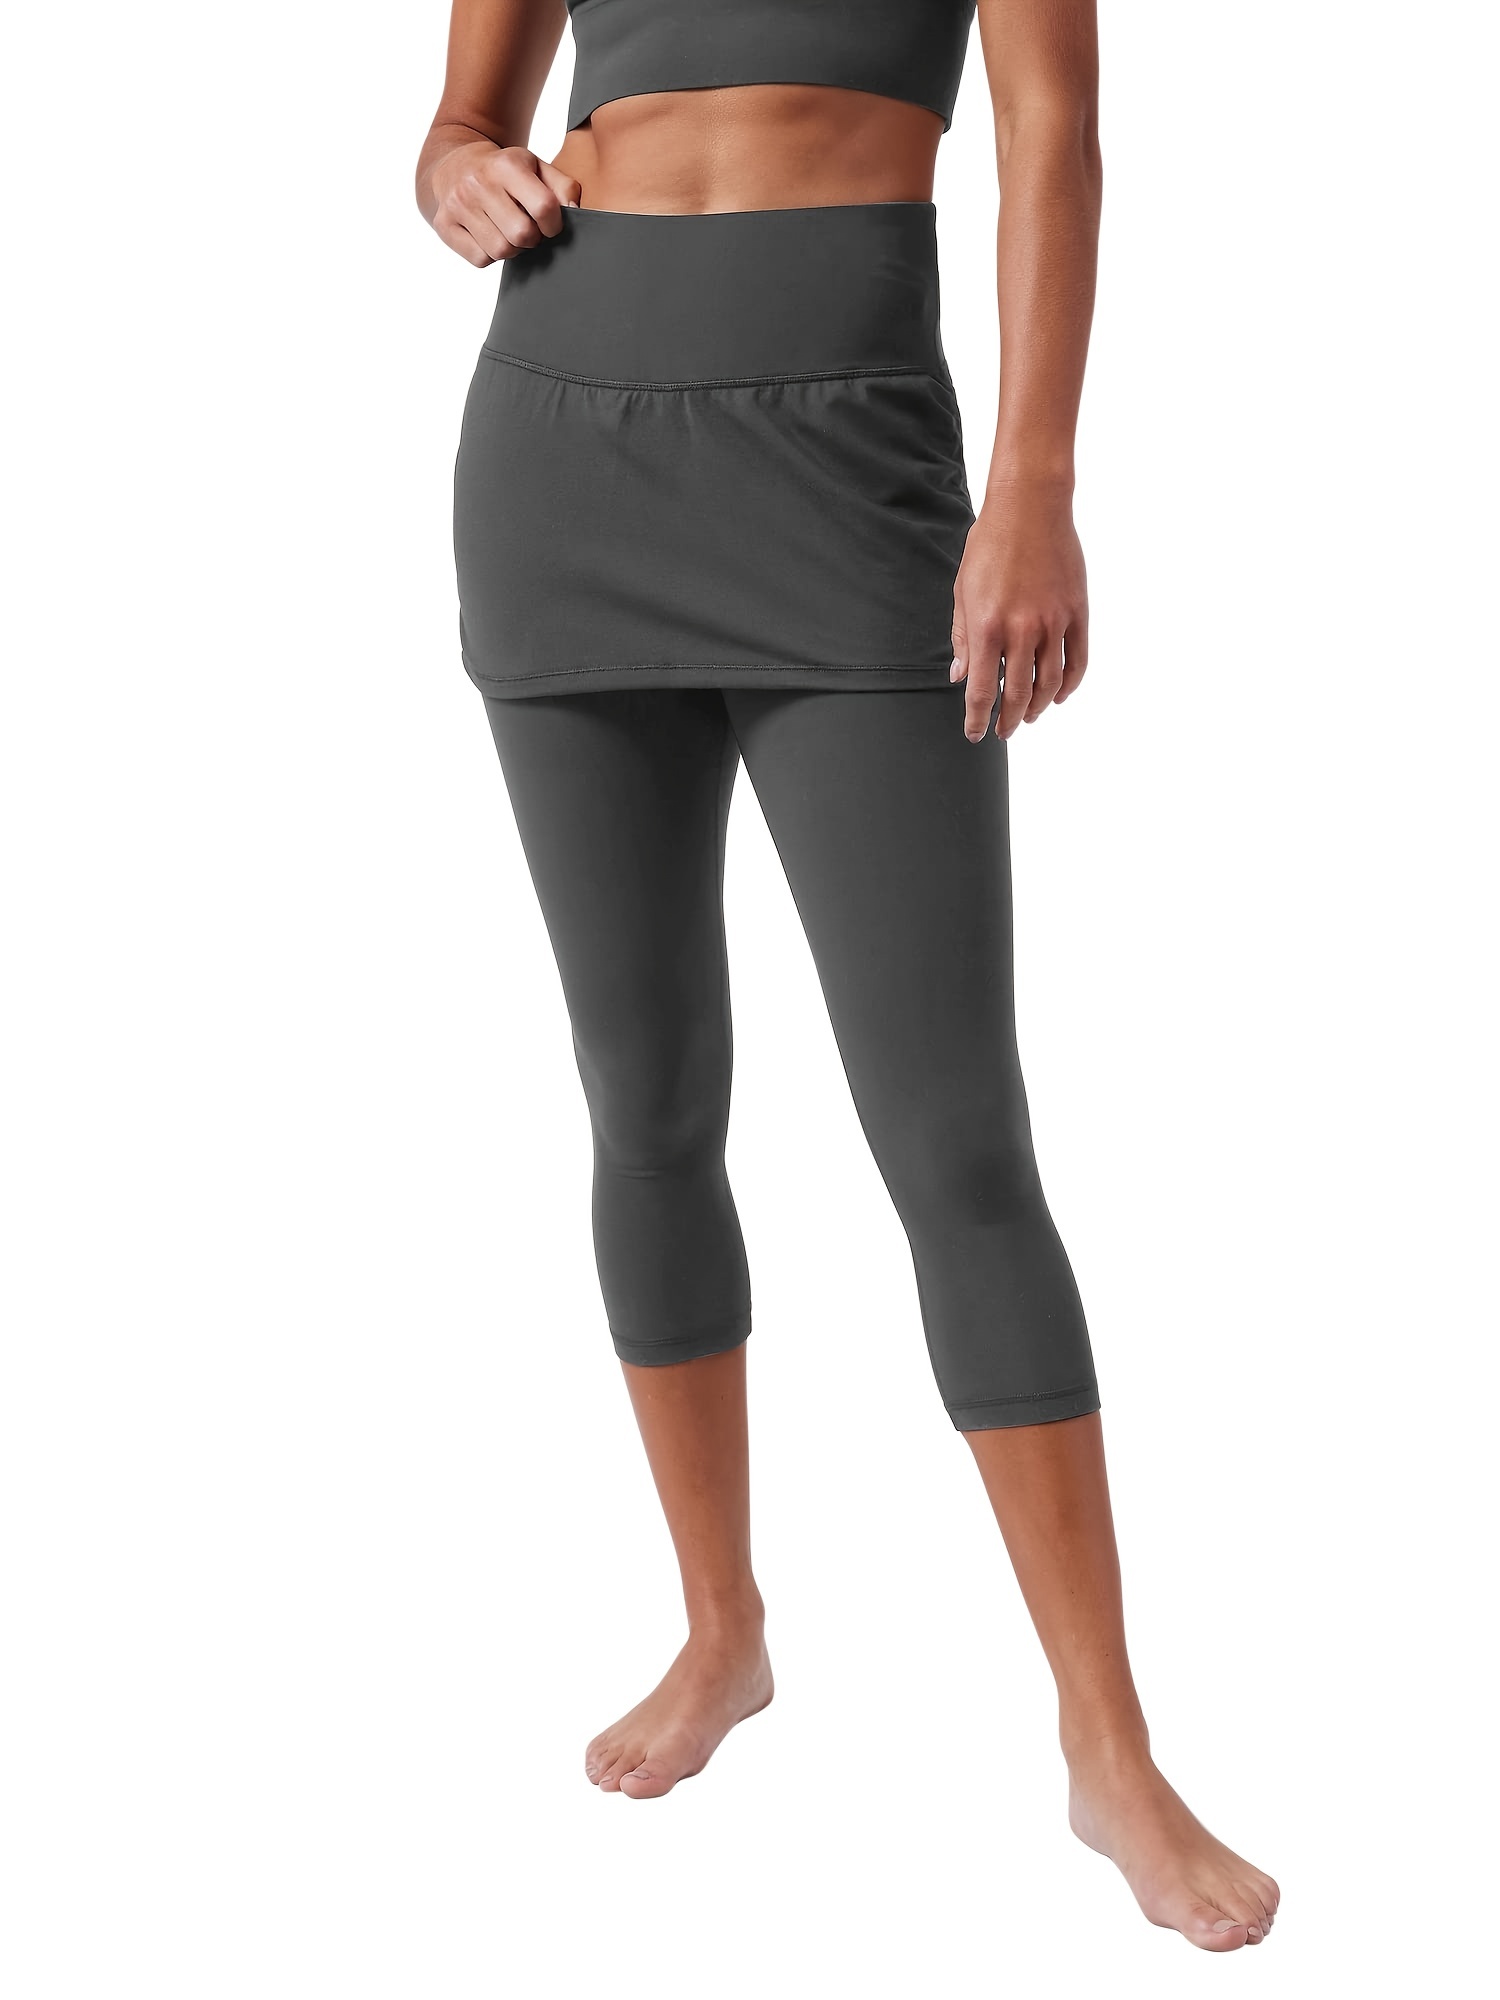 Msh Contrast Breathable Sports Capri Leggings With Pocket, High Waisted  Yoga Tight Capri Pants, Women's Activewear